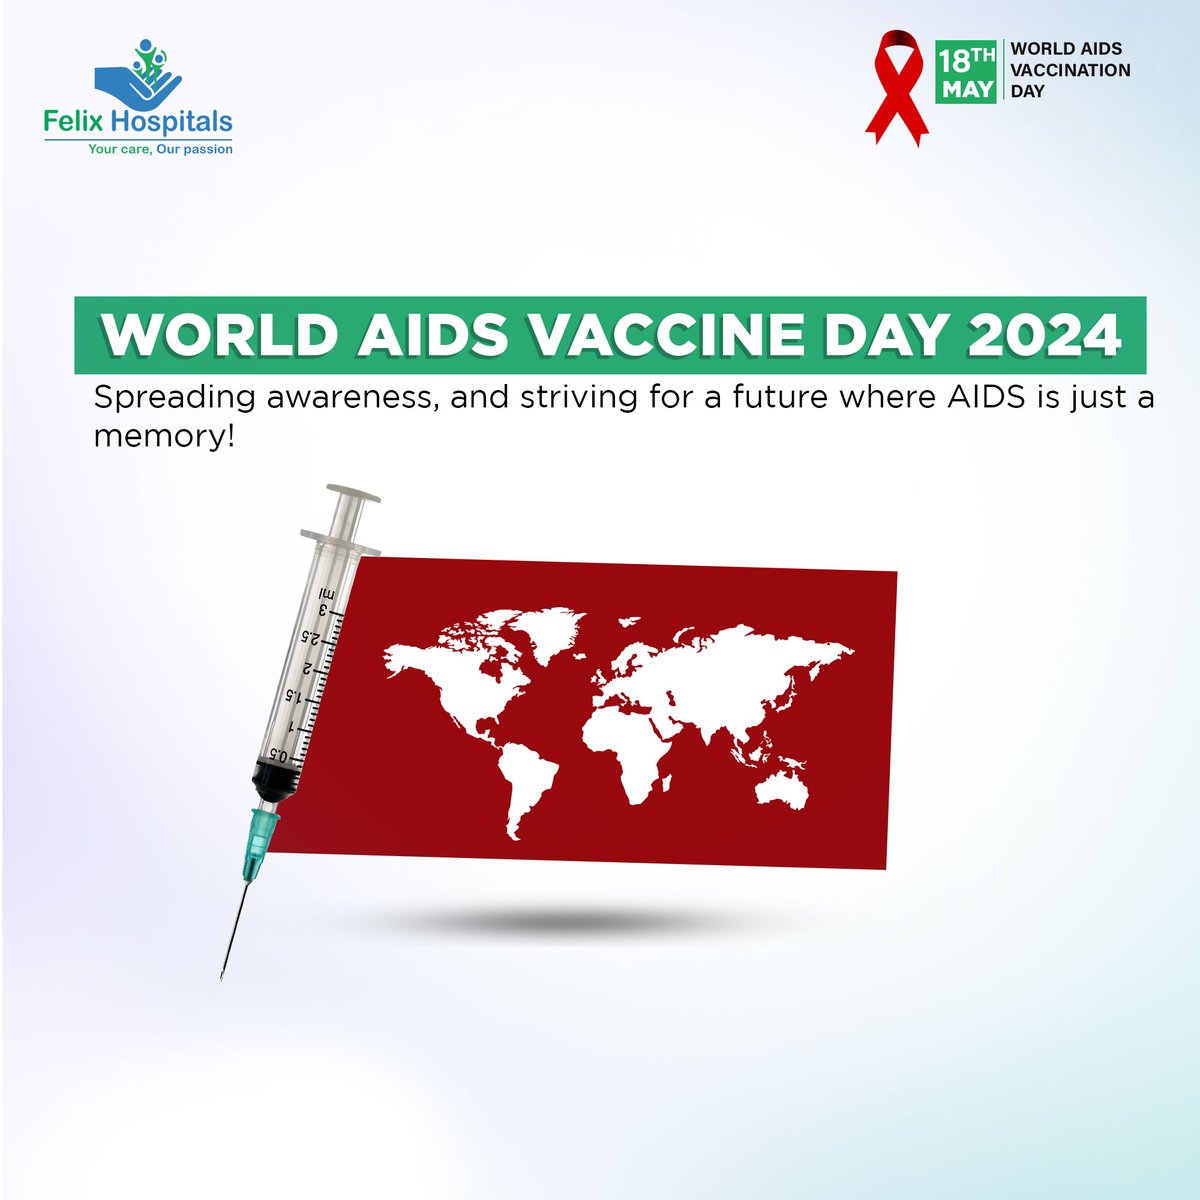 🔬 World AIDS Vaccine Day! 🌍 We still need an AIDS vaccine, but scientists are working hard. Let's honor those lost, celebrate progress, and hope for an AIDS-free future. Raise awareness and make a difference! 💪 #WorldAIDSVaccineDay #AIDS #VaccinesSaveLives #vaccine #doctors